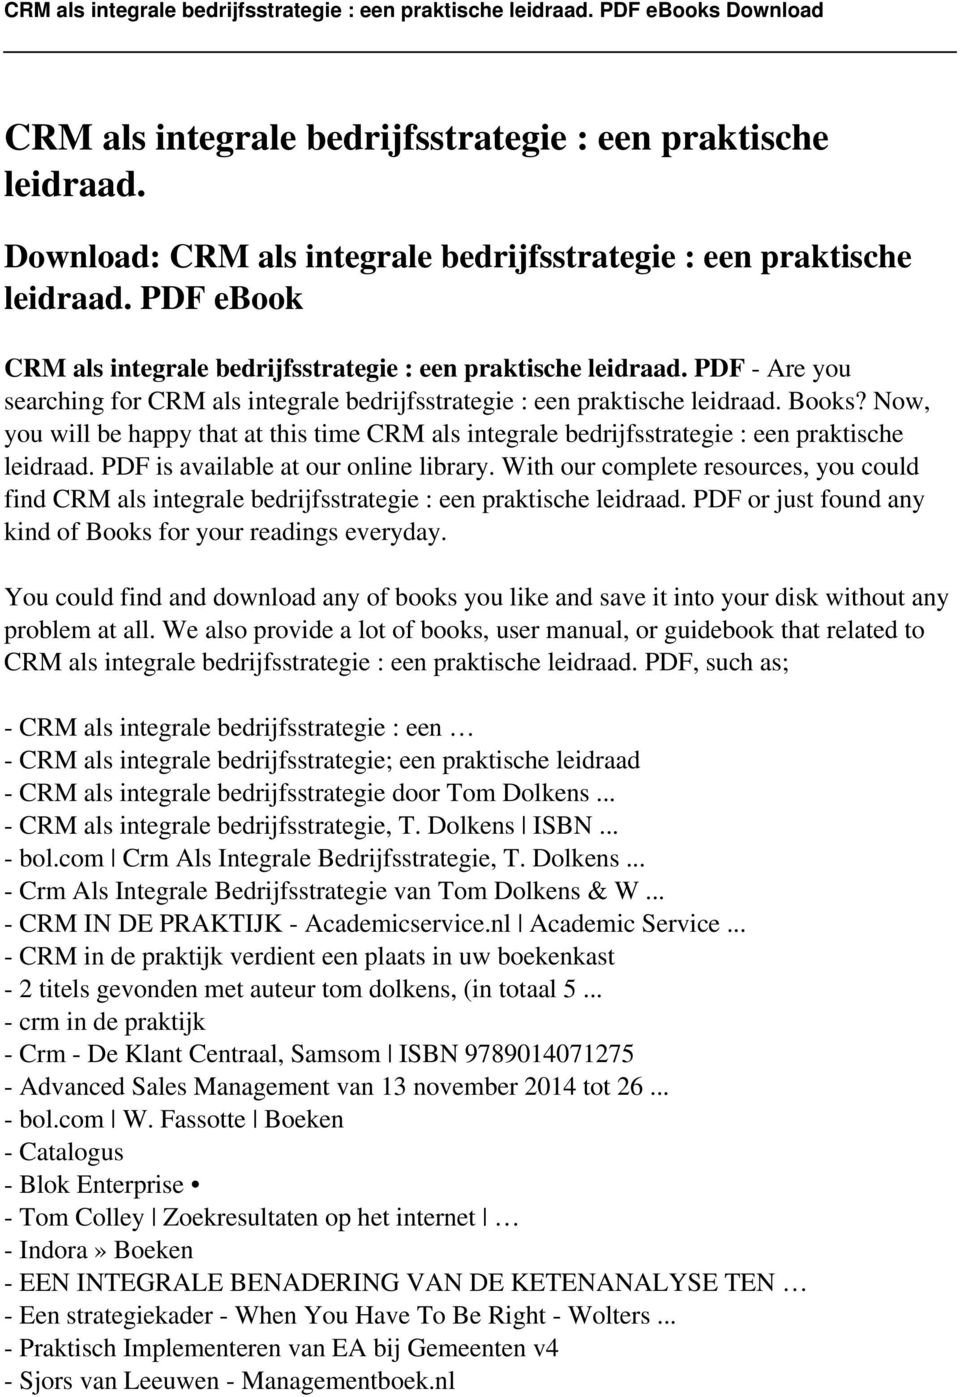 Now, you will be happy that at this time CRM als integrale bedrijfsstrategie : een praktische leidraad. PDF is available at our online library.